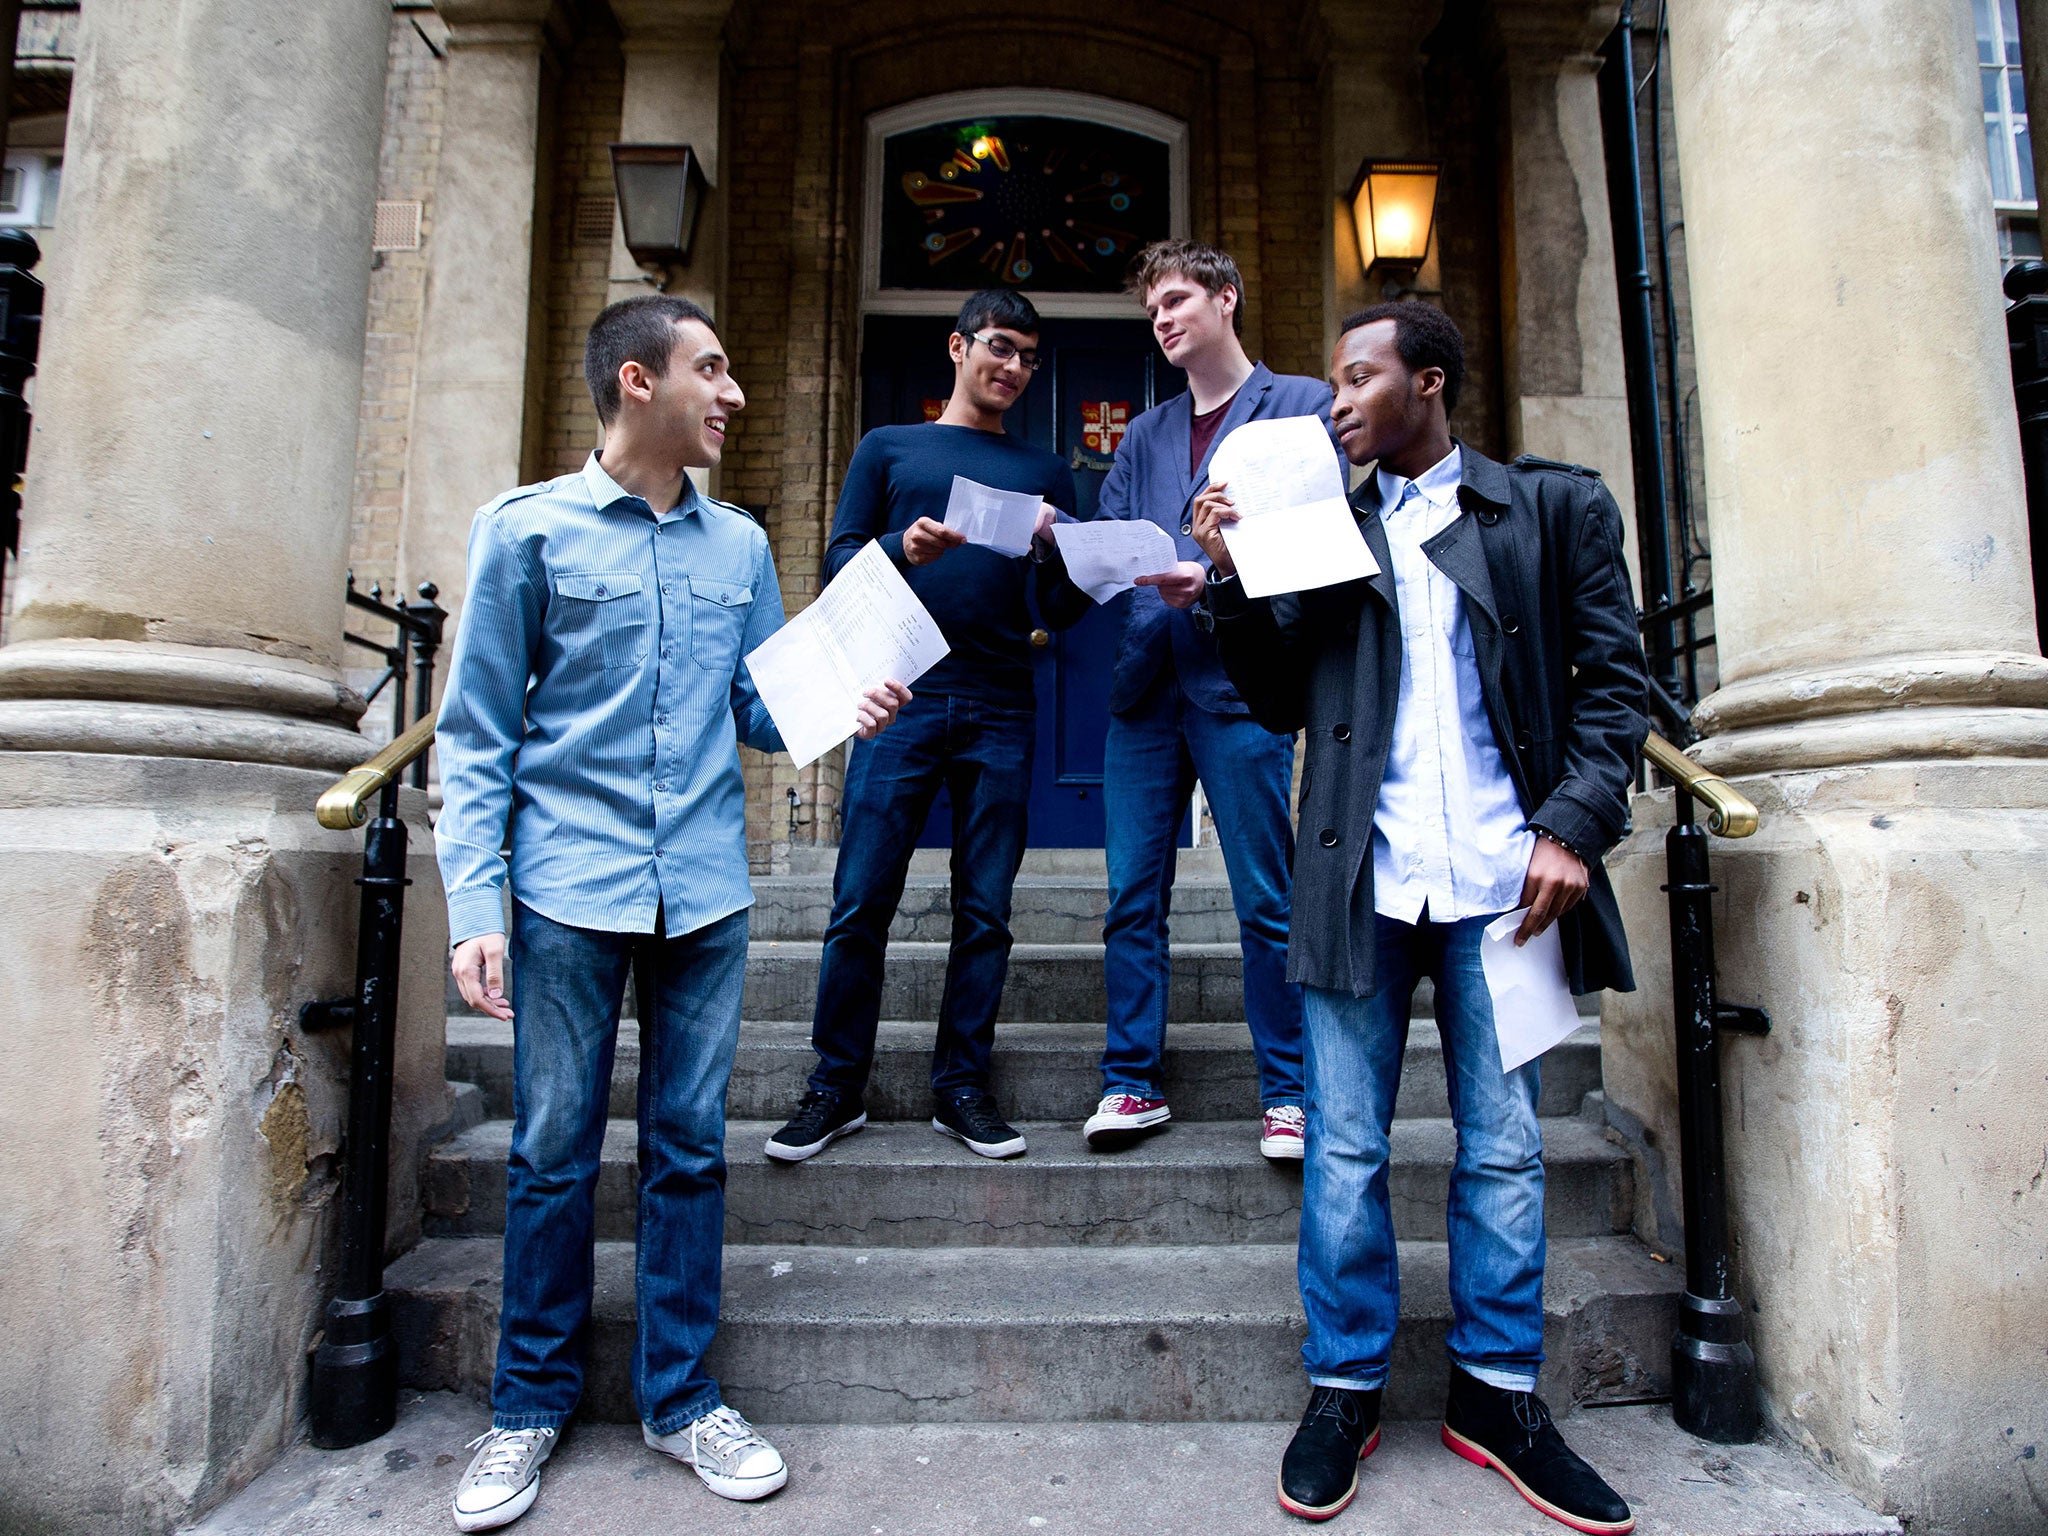 Students from Central Foundation Boys School: (right to left) Philip Wereko, Theo Fiore,
Maksud Rahman, and Waseem al-Abdulla